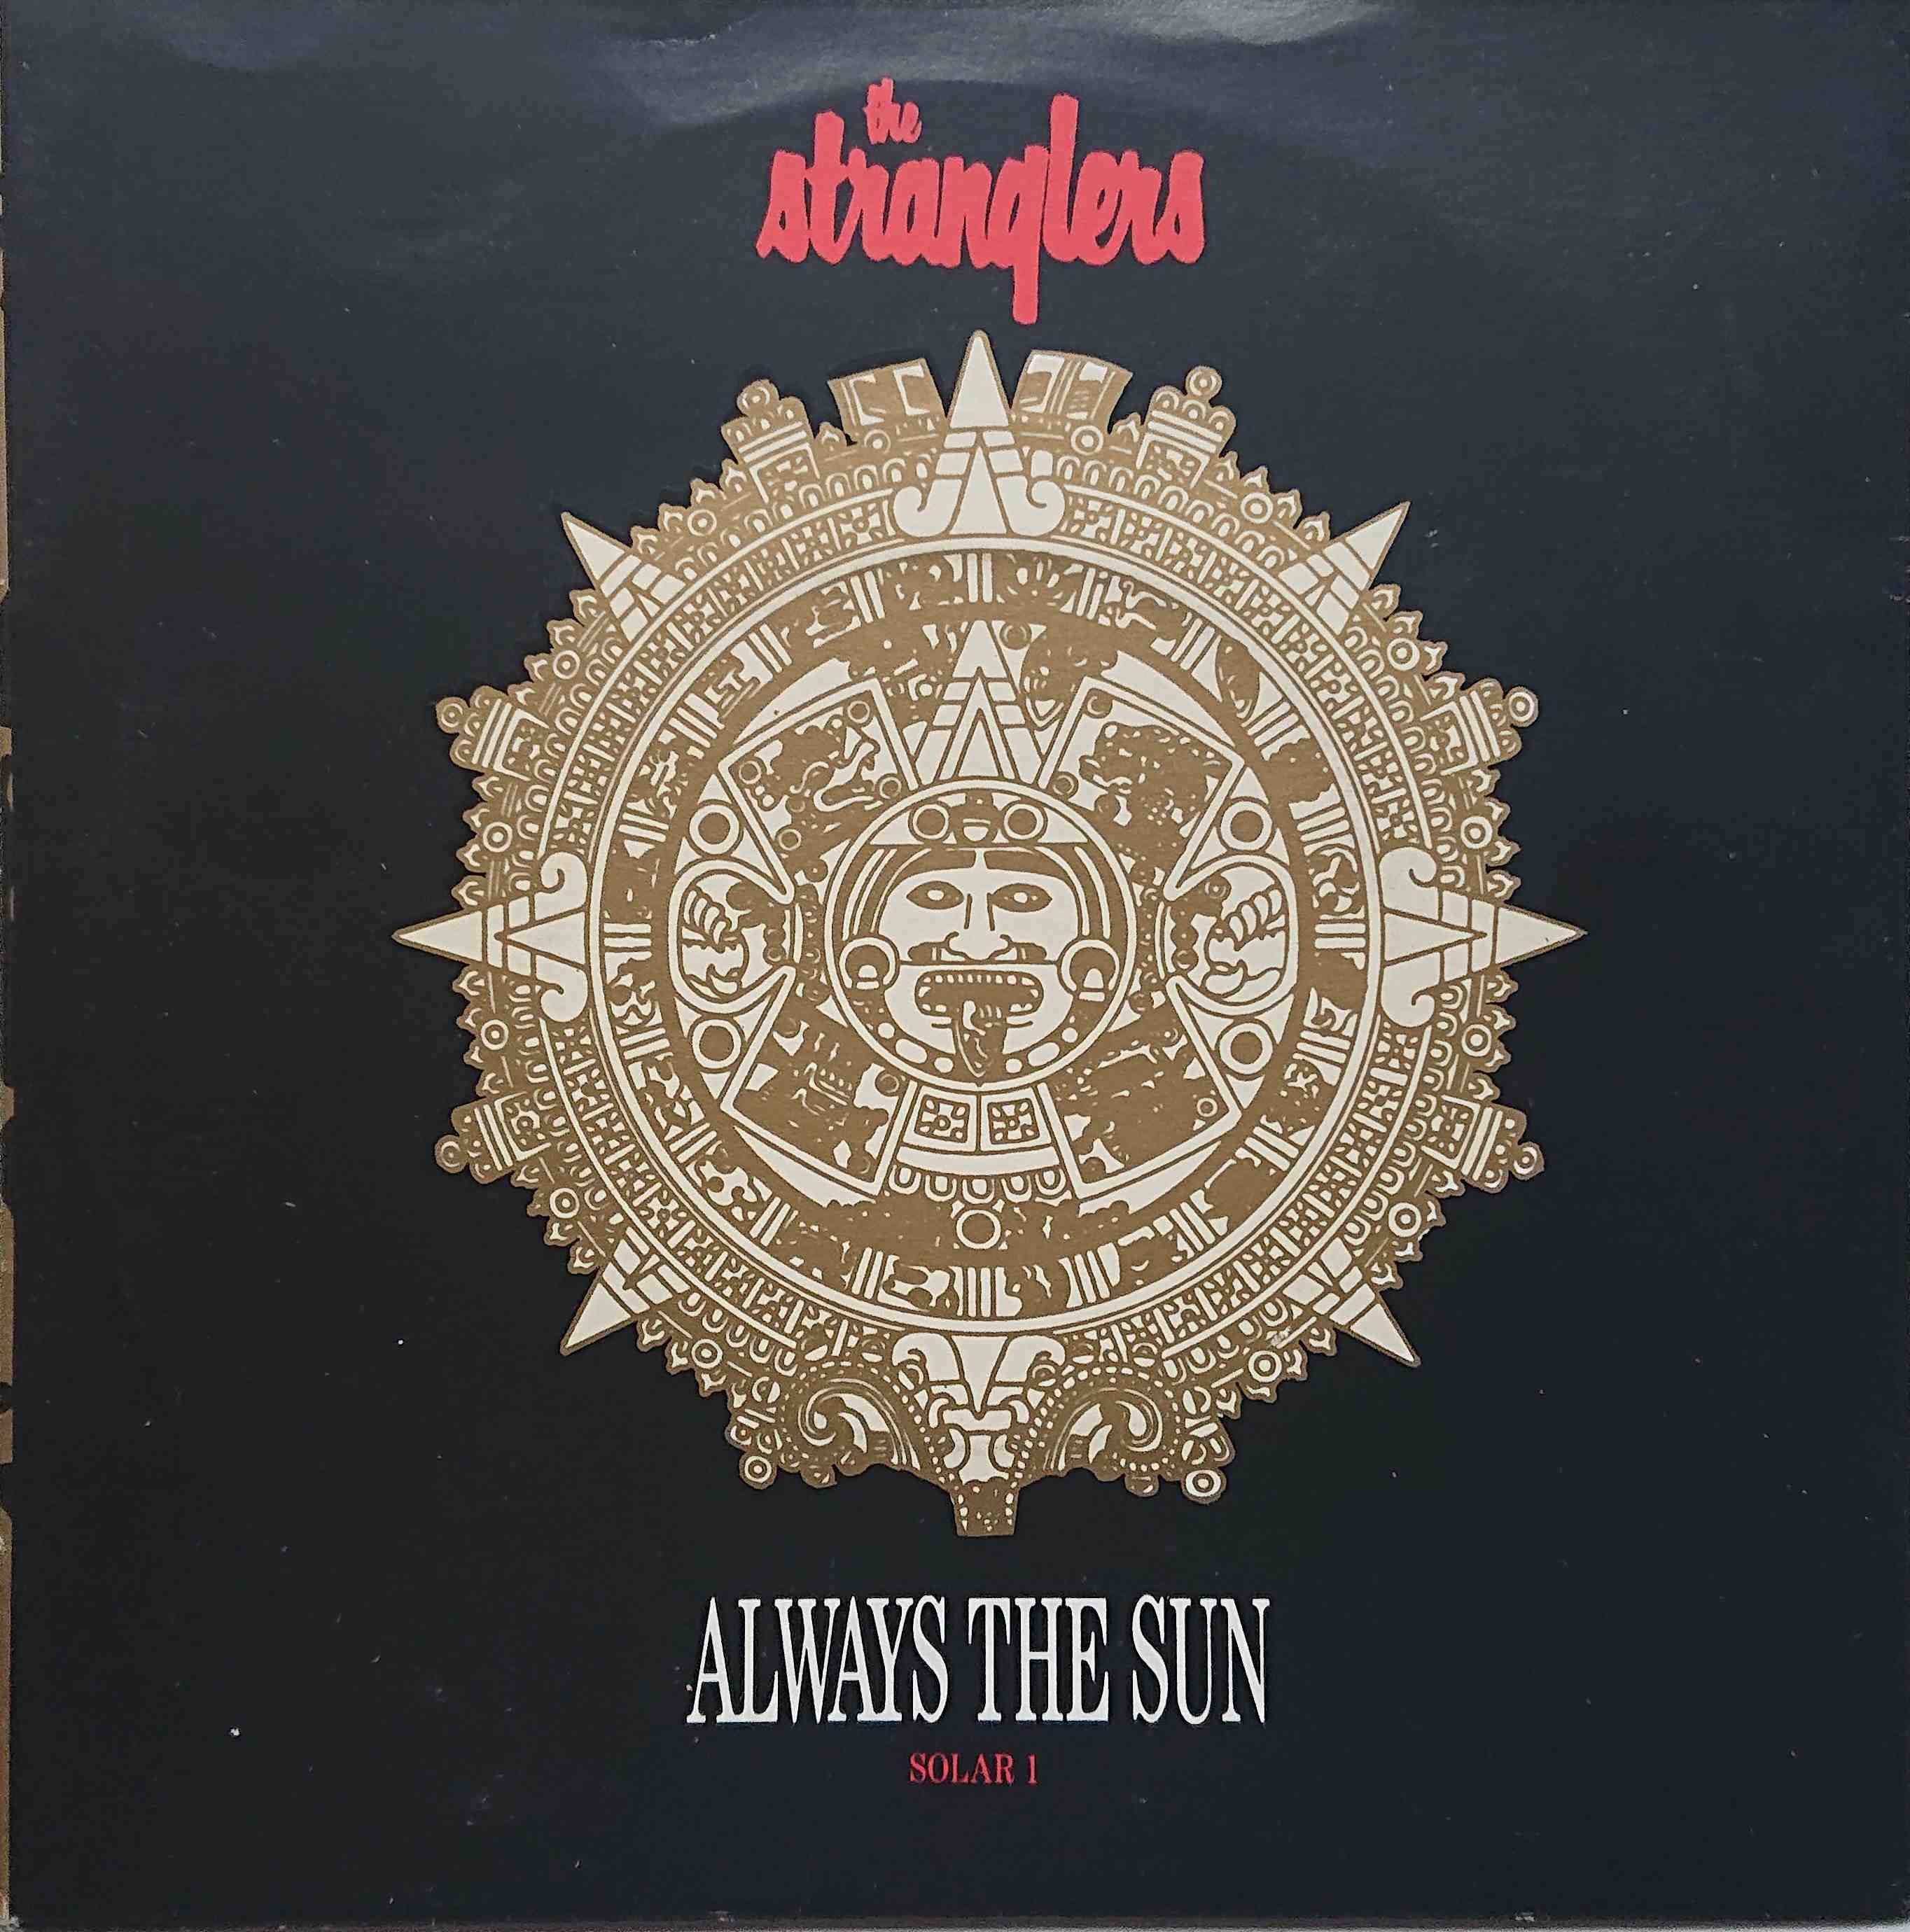 Picture of Always the Sun by artist The Stranglers  from The Stranglers singles